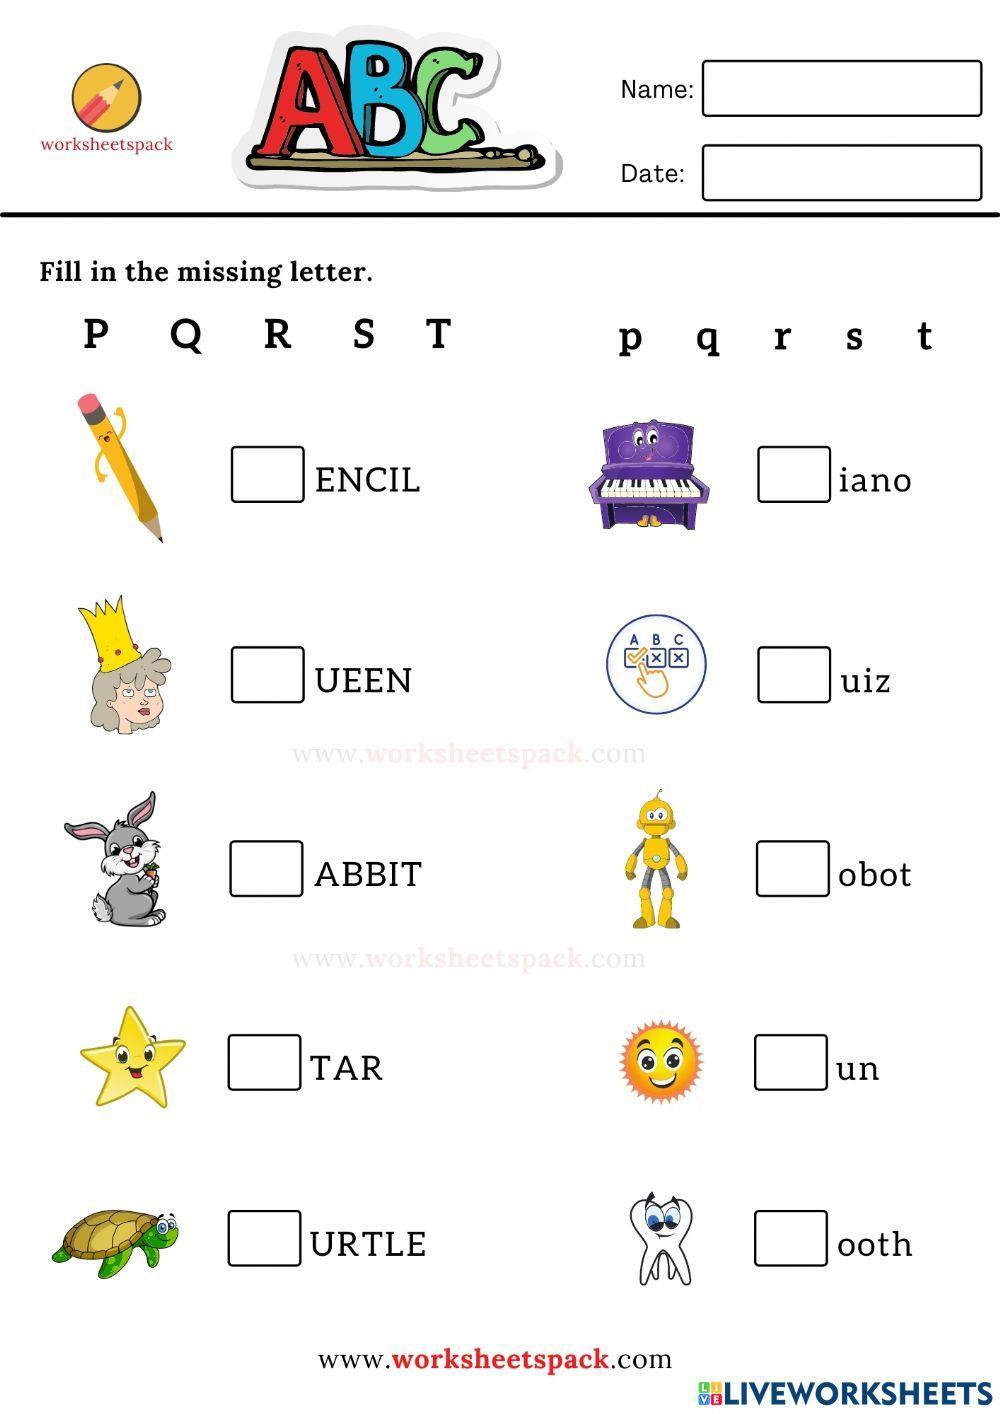 Fill in the missing letter worksheets P to T